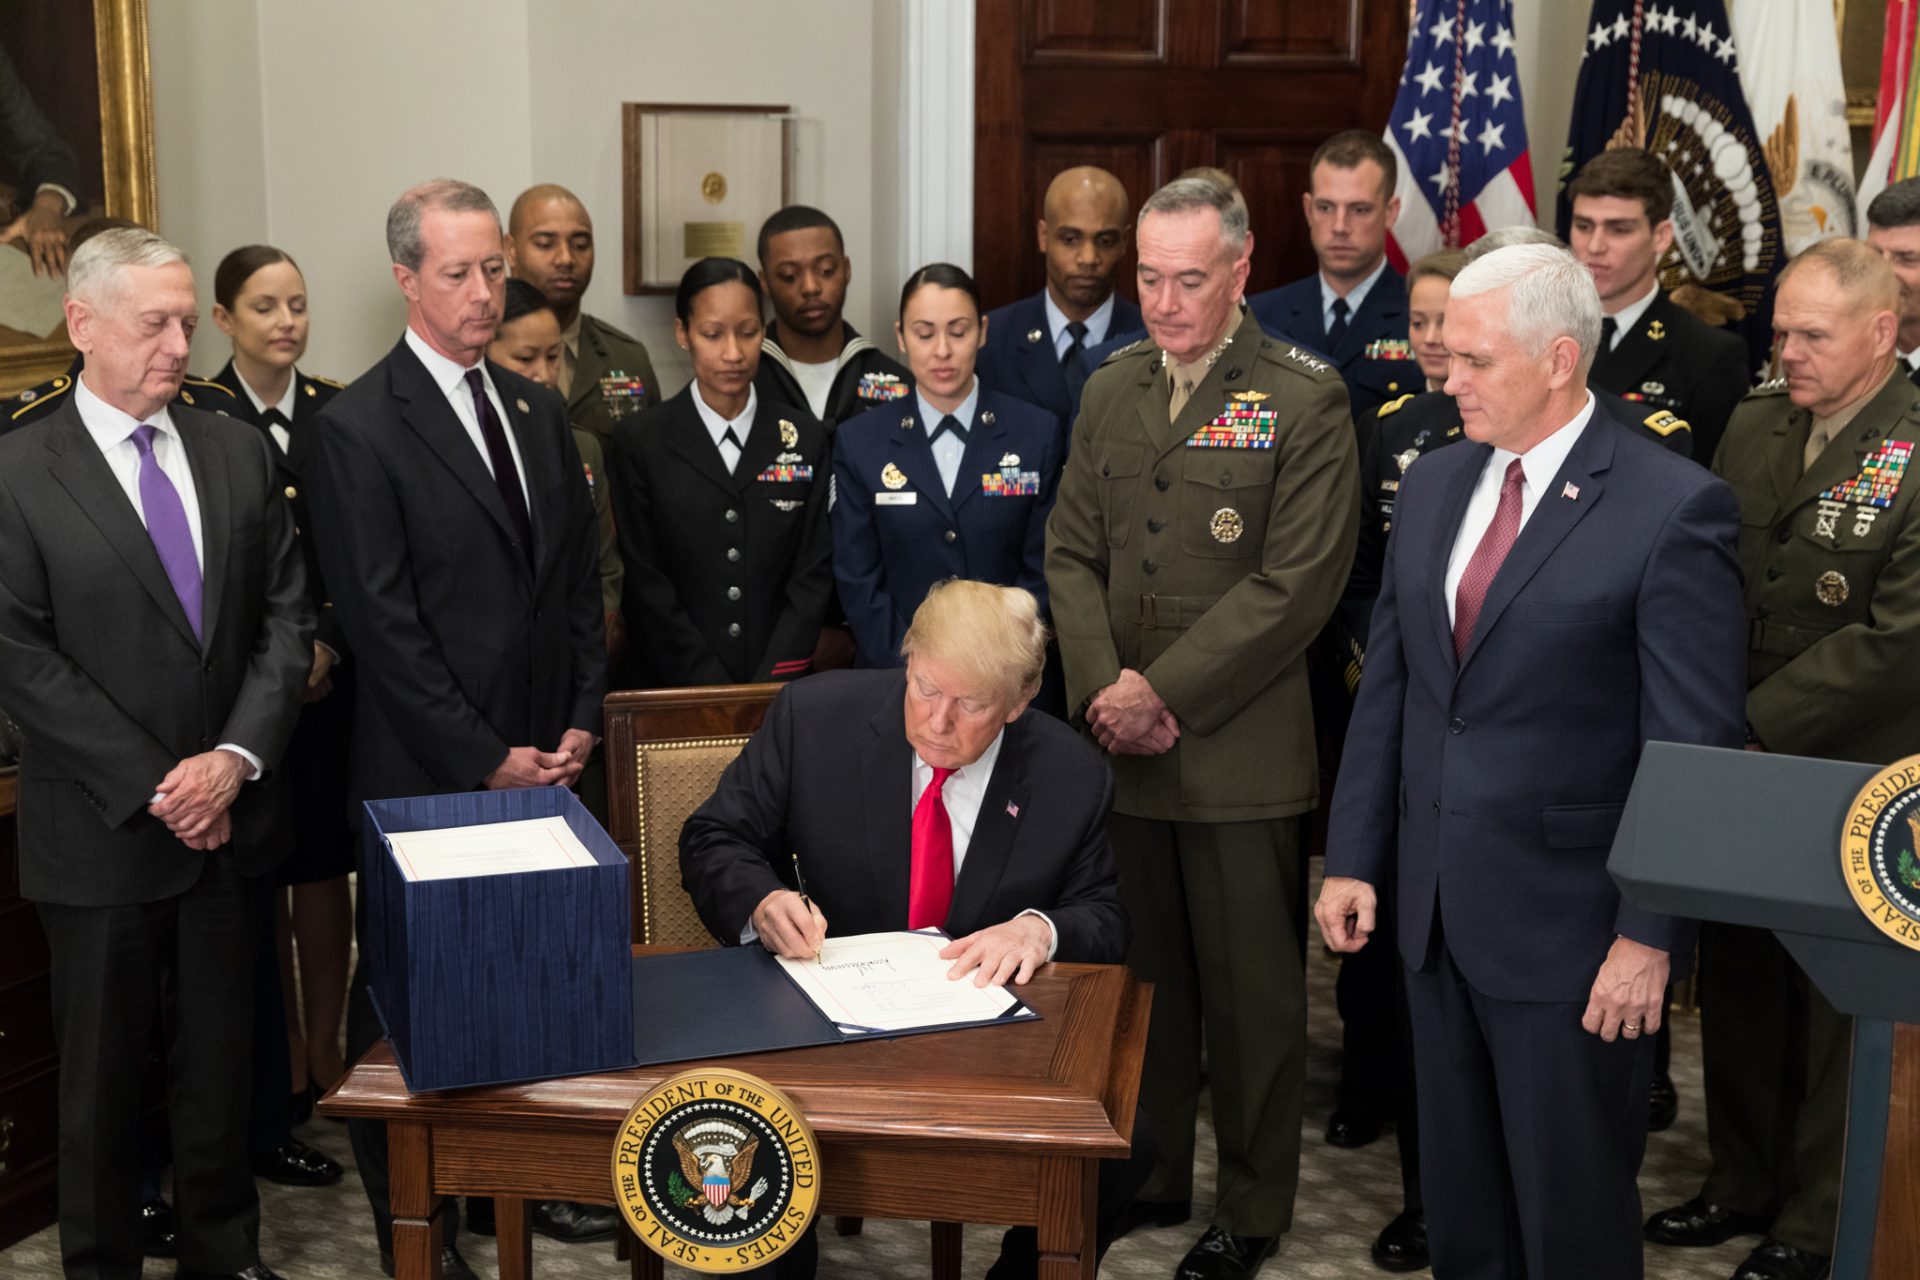 President Donald J. Trump, joined by Vice President Mike Pence and senior military leaders, signs H.R. 2810, the National Defense Authorization Act (NDAA) for fiscal year 2018, in the Roosevelt Room at the White House, Dec. 12, 2017.